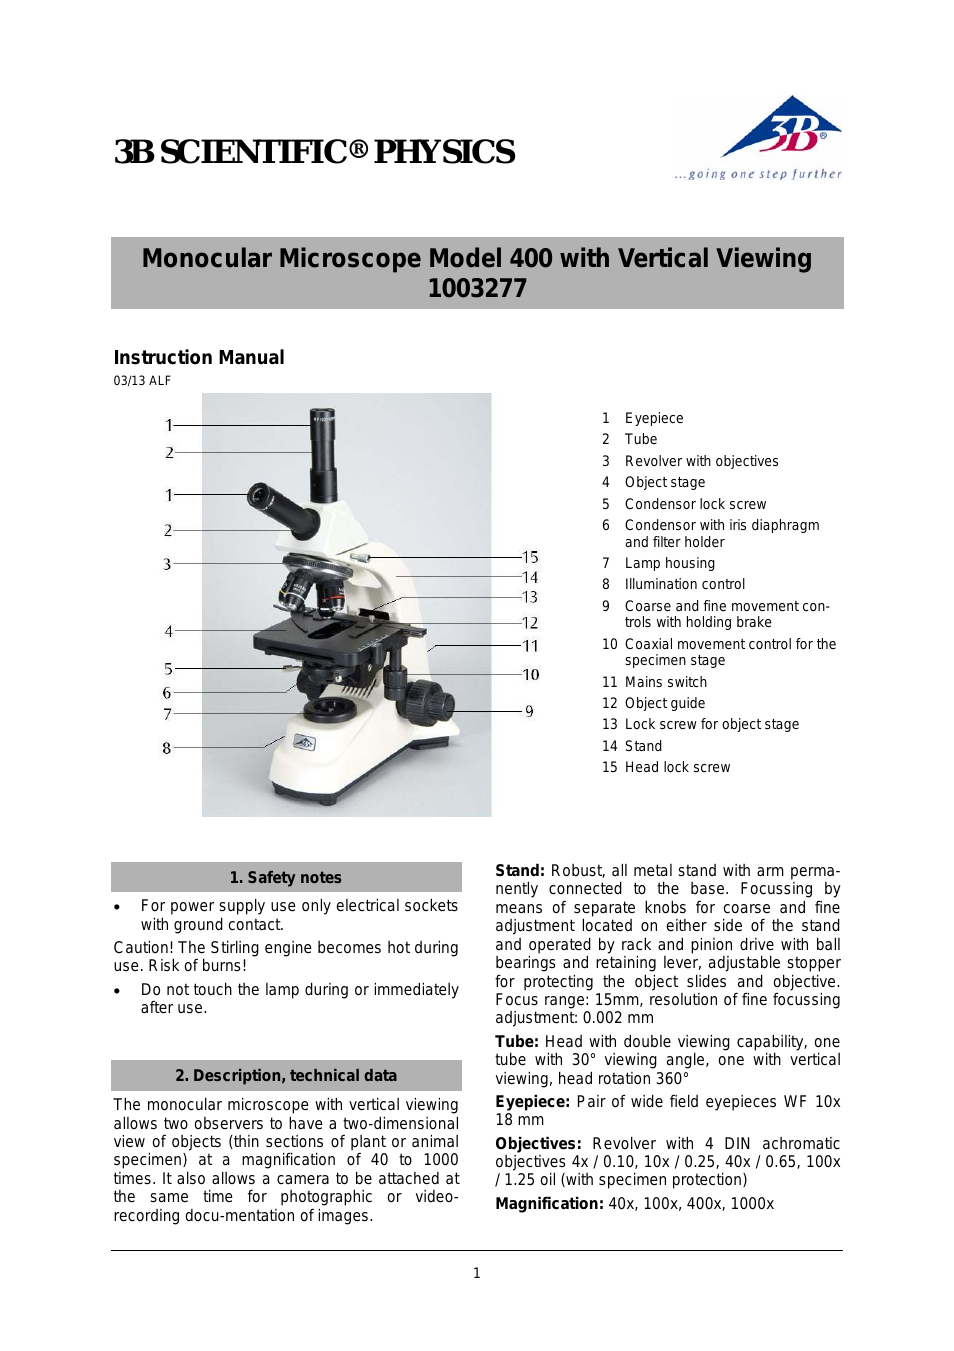 Monocular Microscope Model 400 with Vertical Viewing